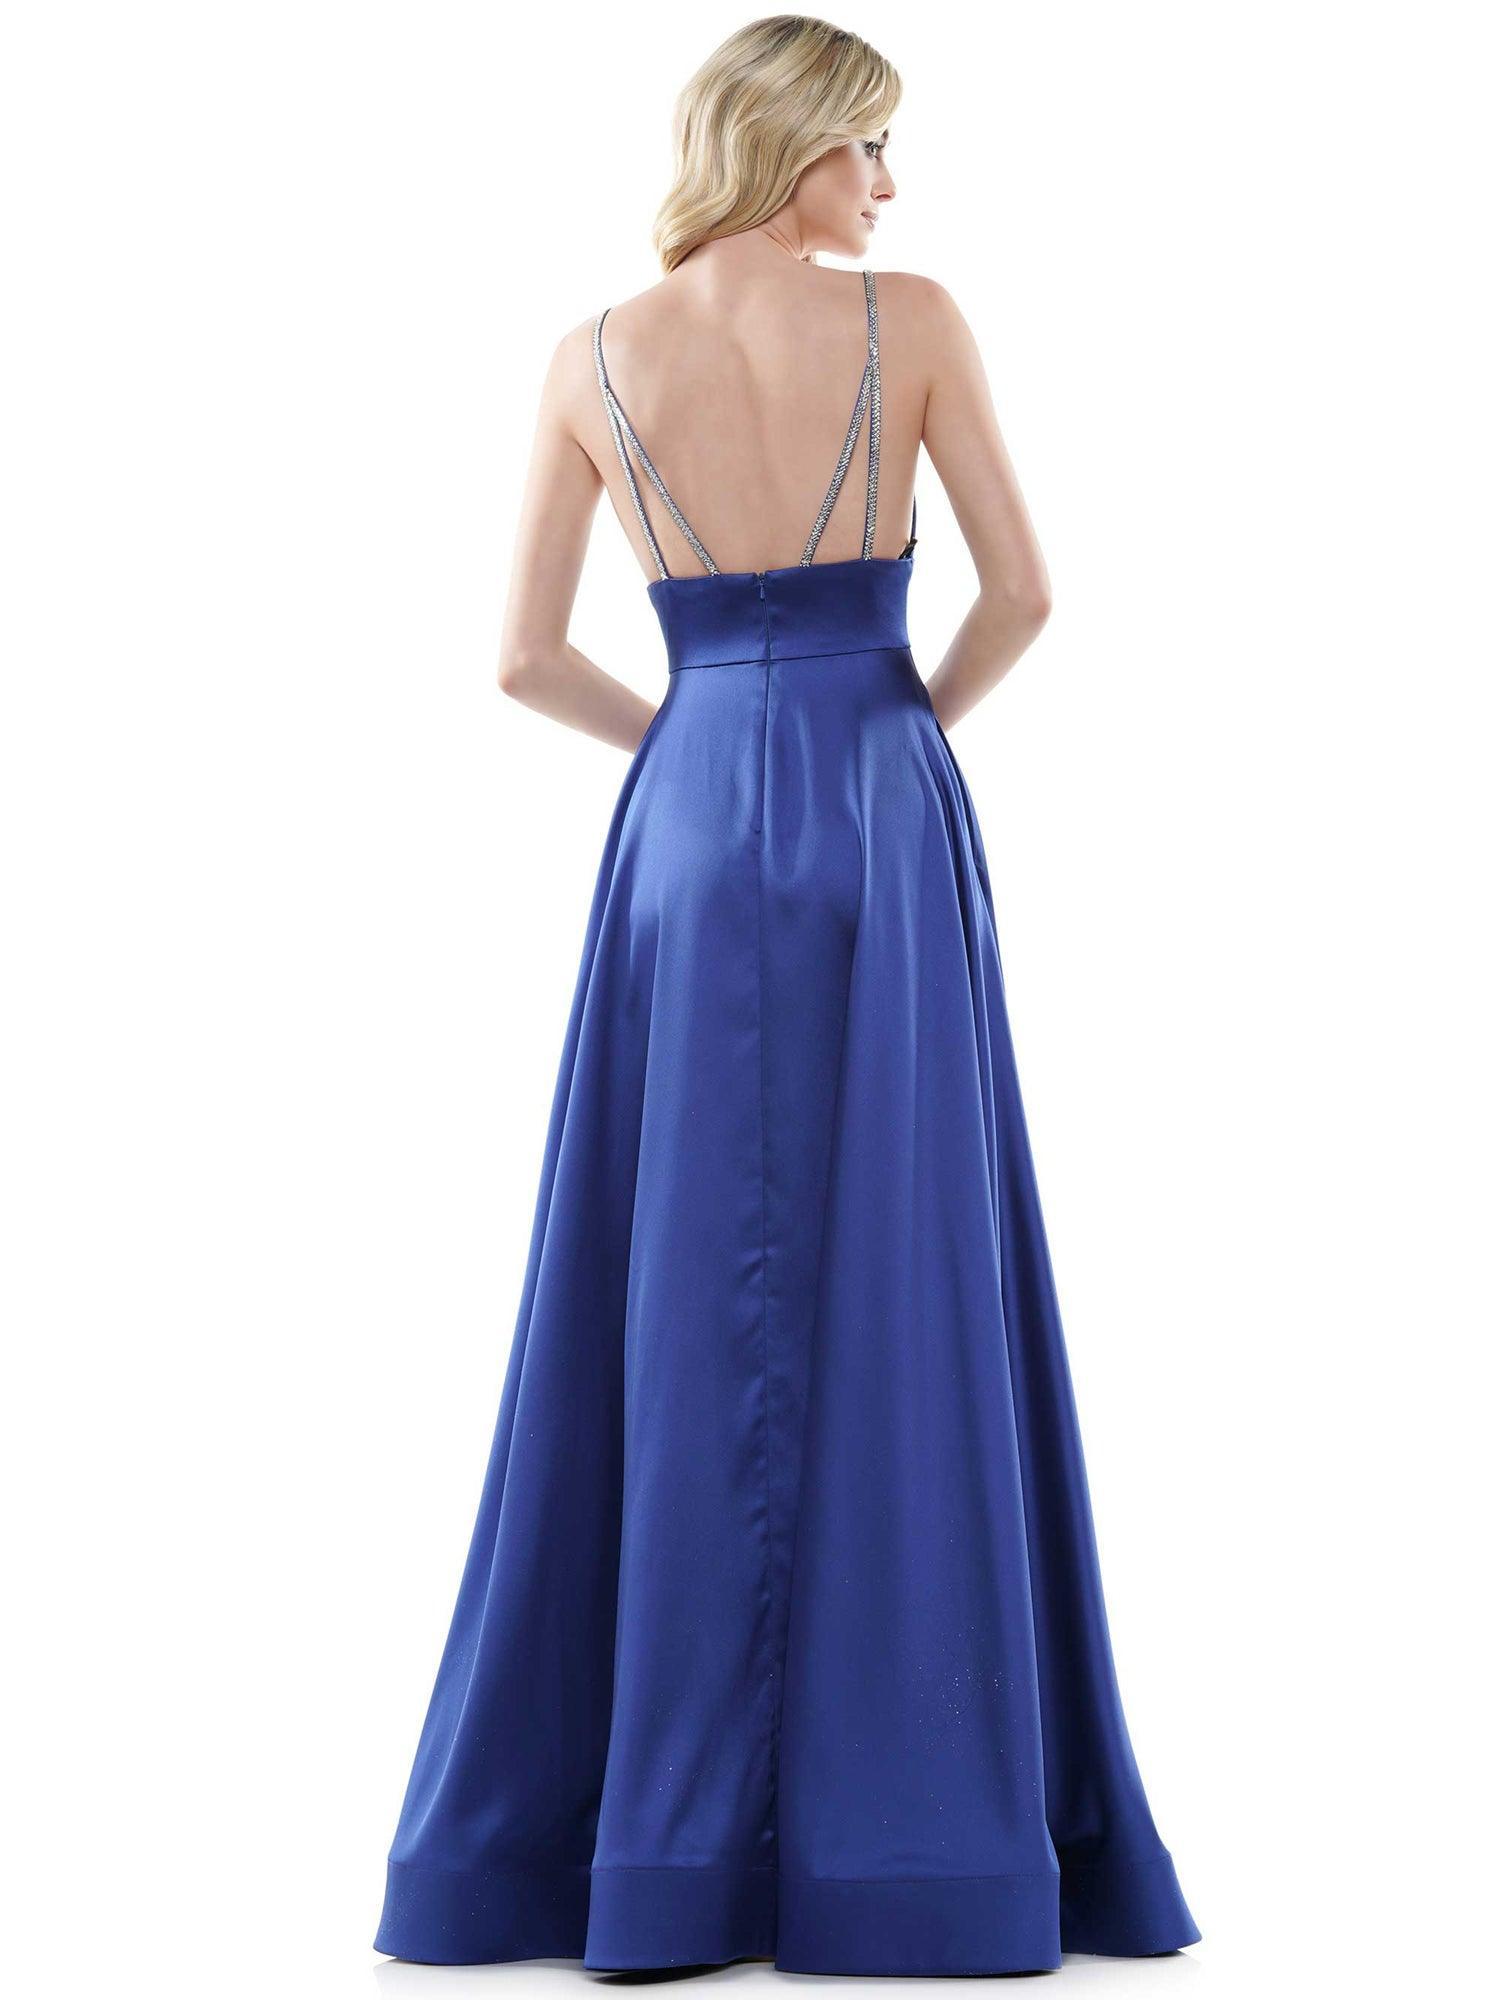 Colors Long Formal Spaghetti Strap Prom Dress 968 - The Dress Outlet